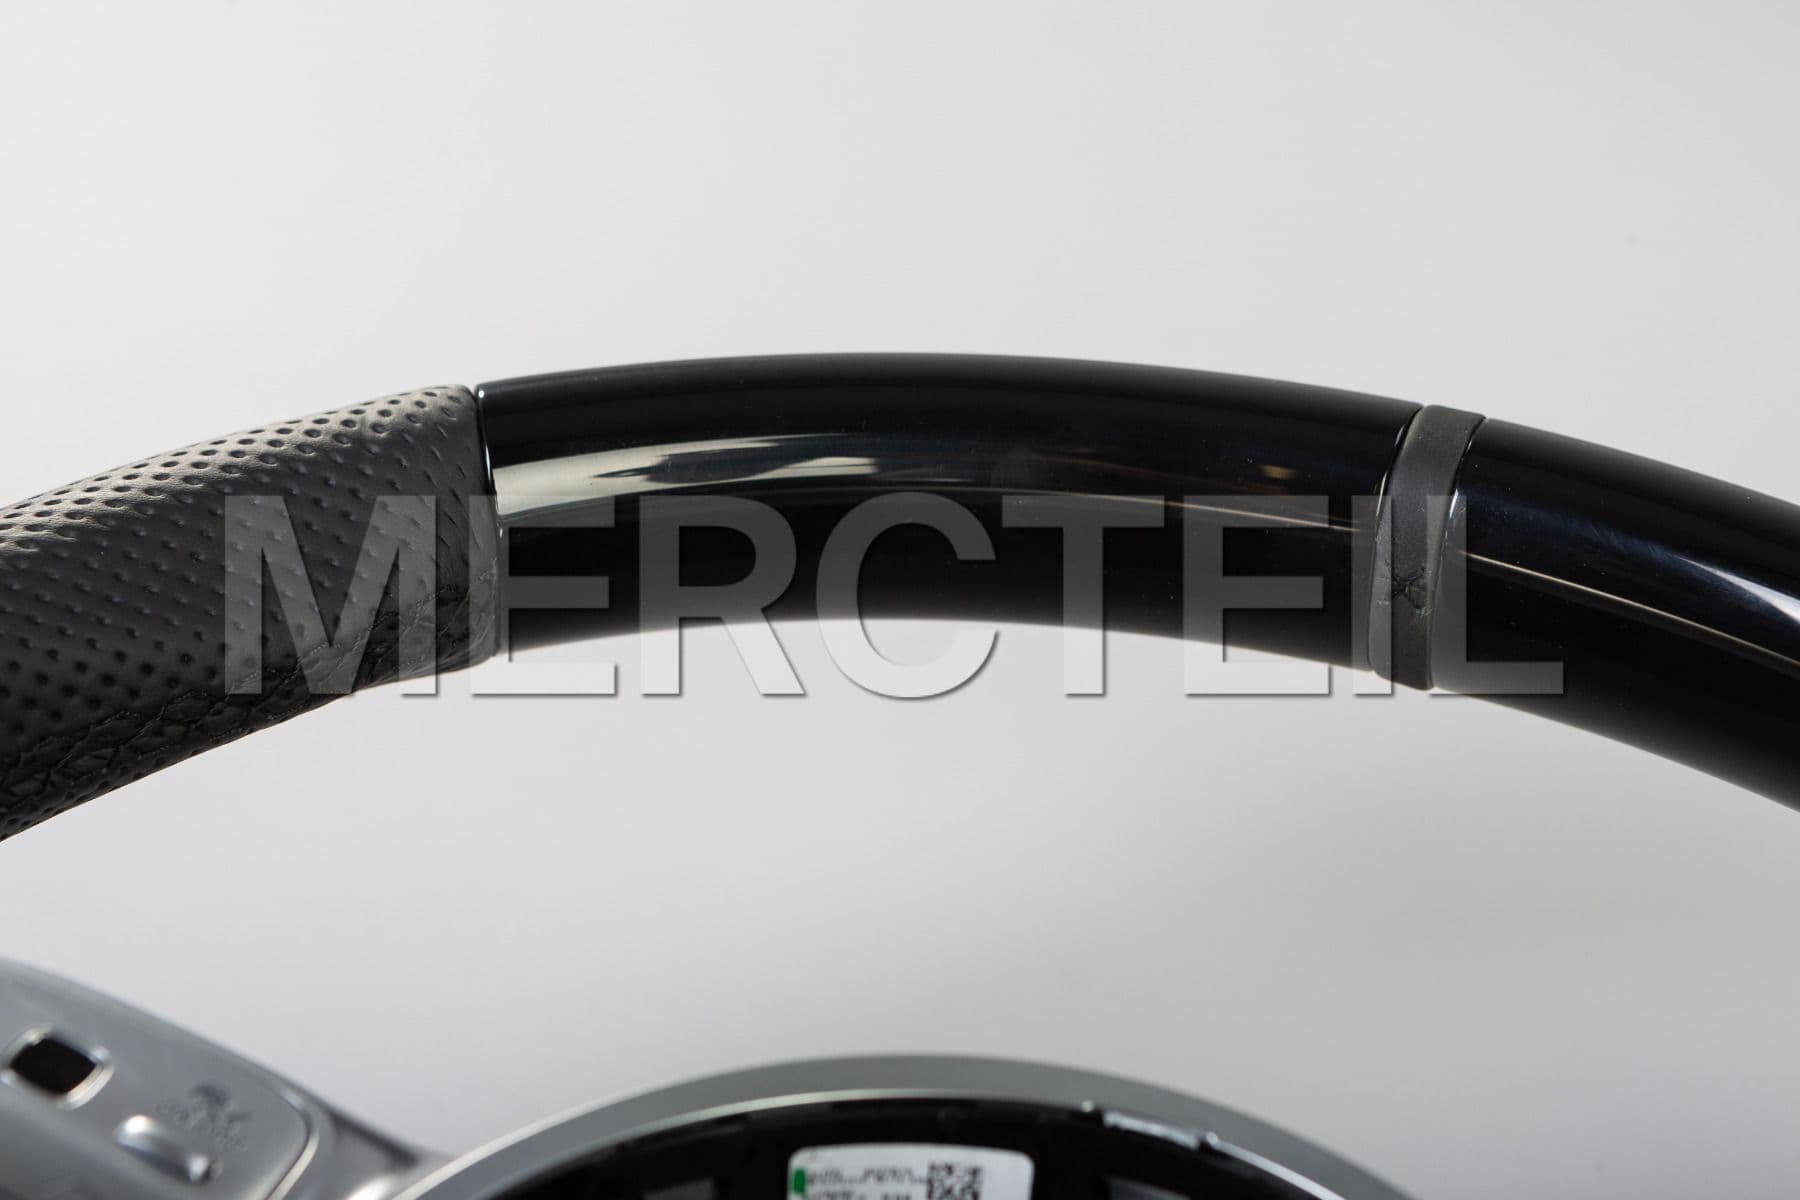 AMG Black Leather Steering Wheel Piano Black; A0994640005 9E38, AMG GT C190.